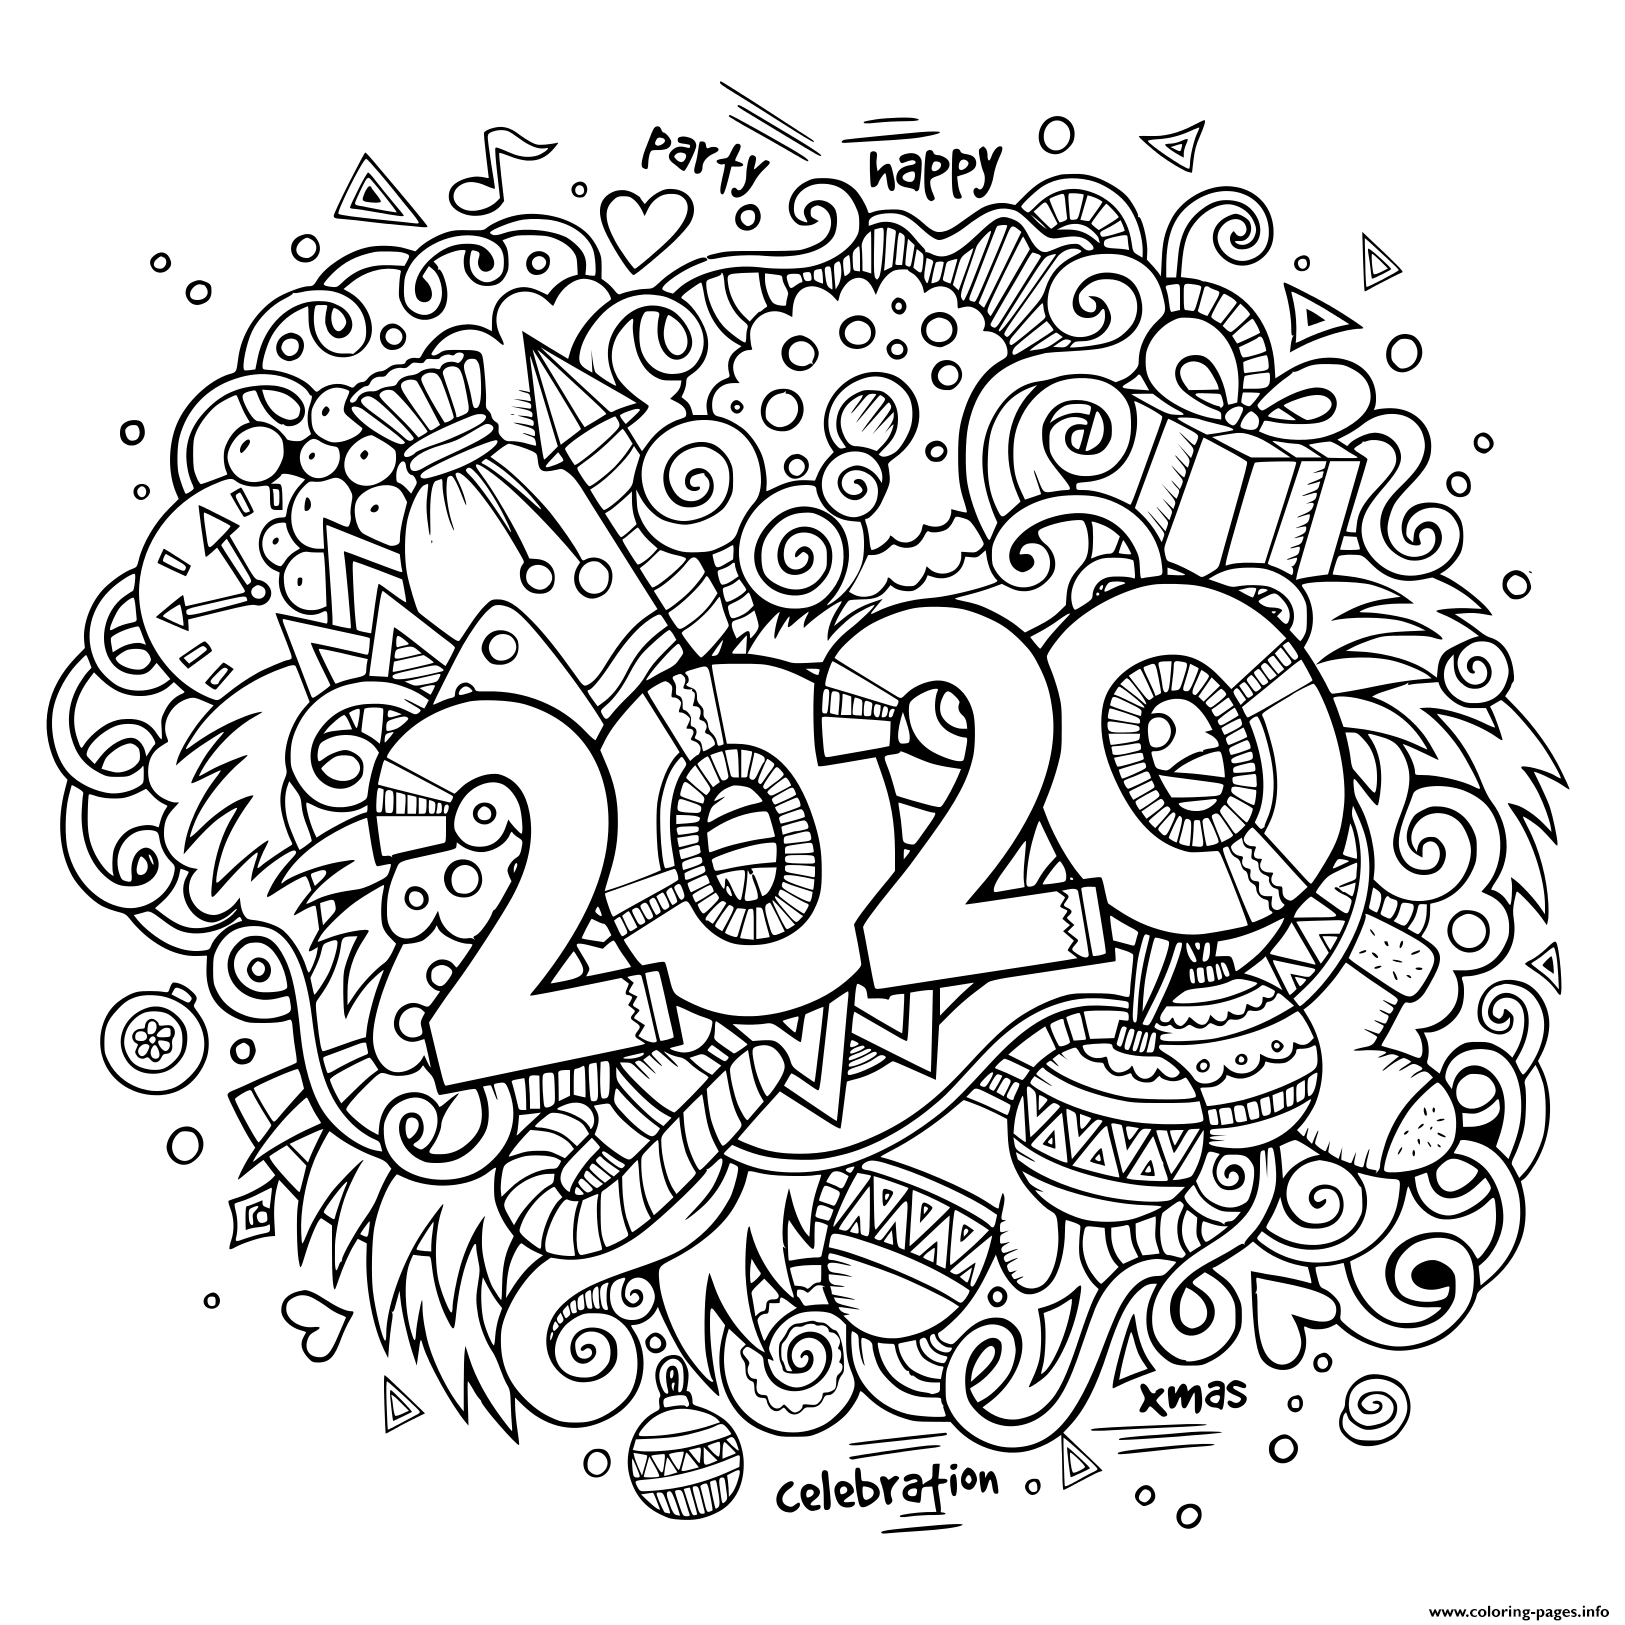 New Year 2020 Doodles Objects And Elements Poster Design ...